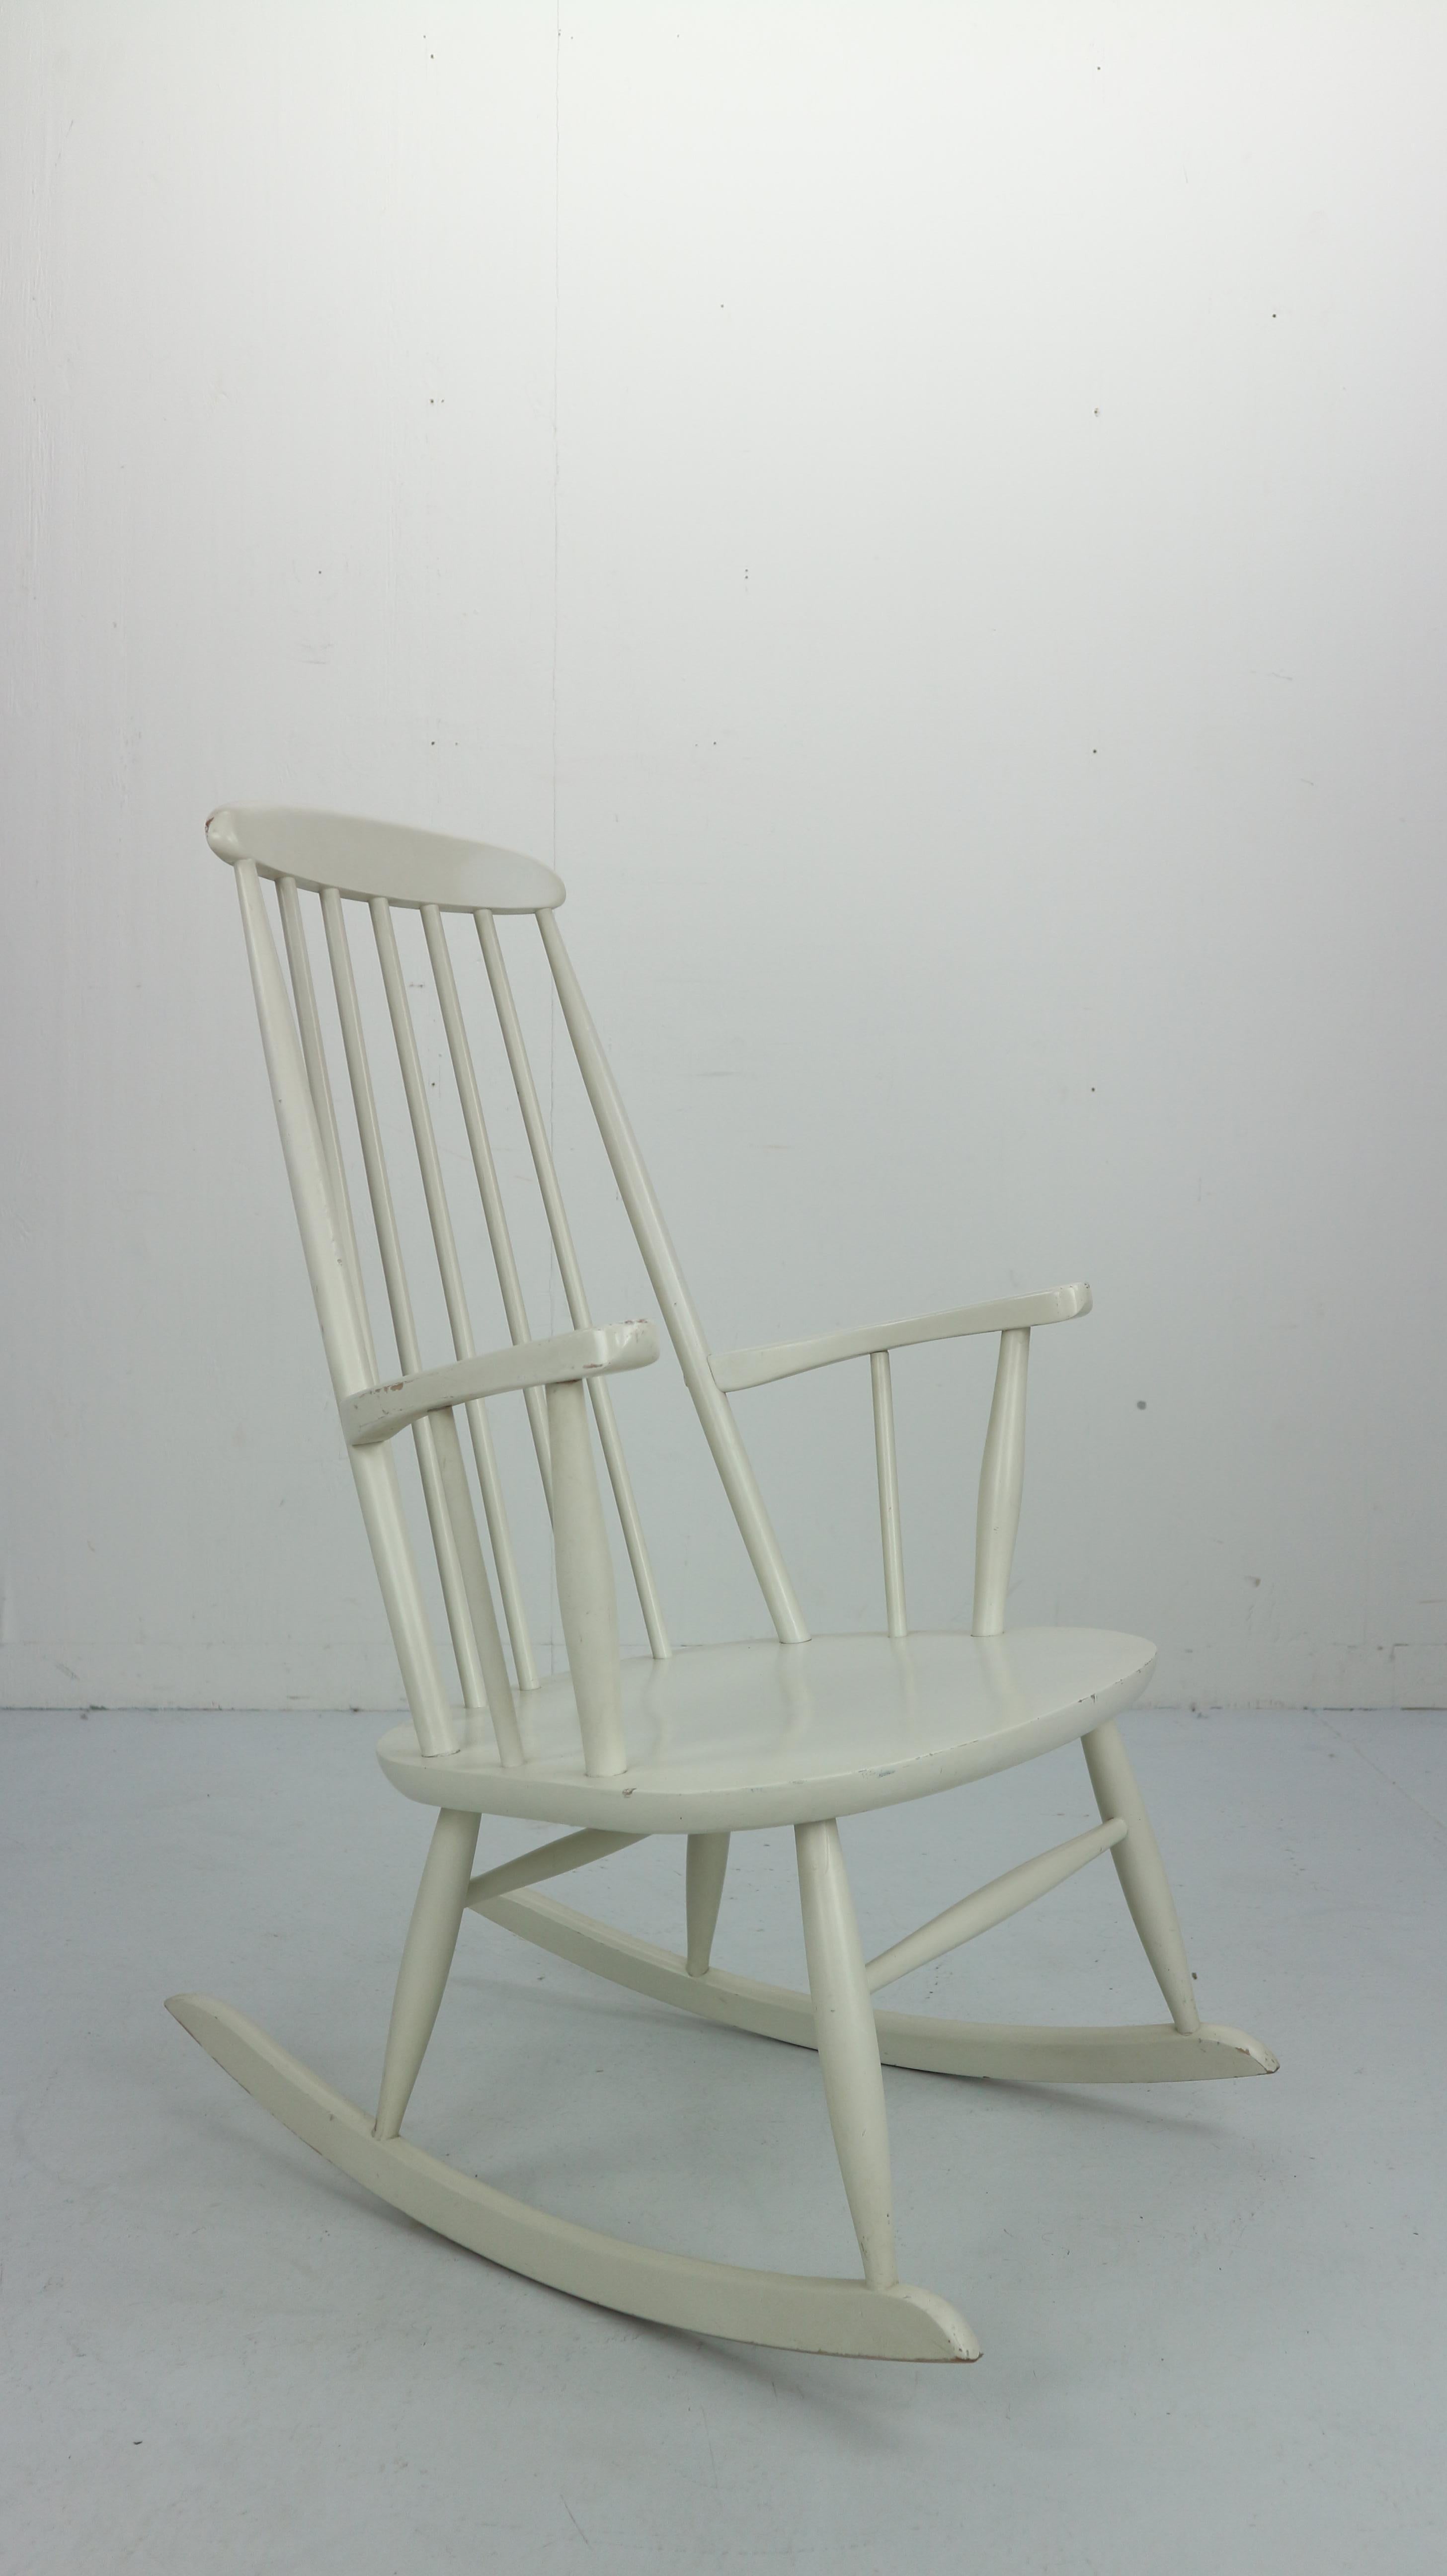 Classical Scandinavian design model of rocking chairs from the 1960s.
Wooden frame has been painted in a white colour.
Very beautiful and elegant design, very comfortable chair to relax.